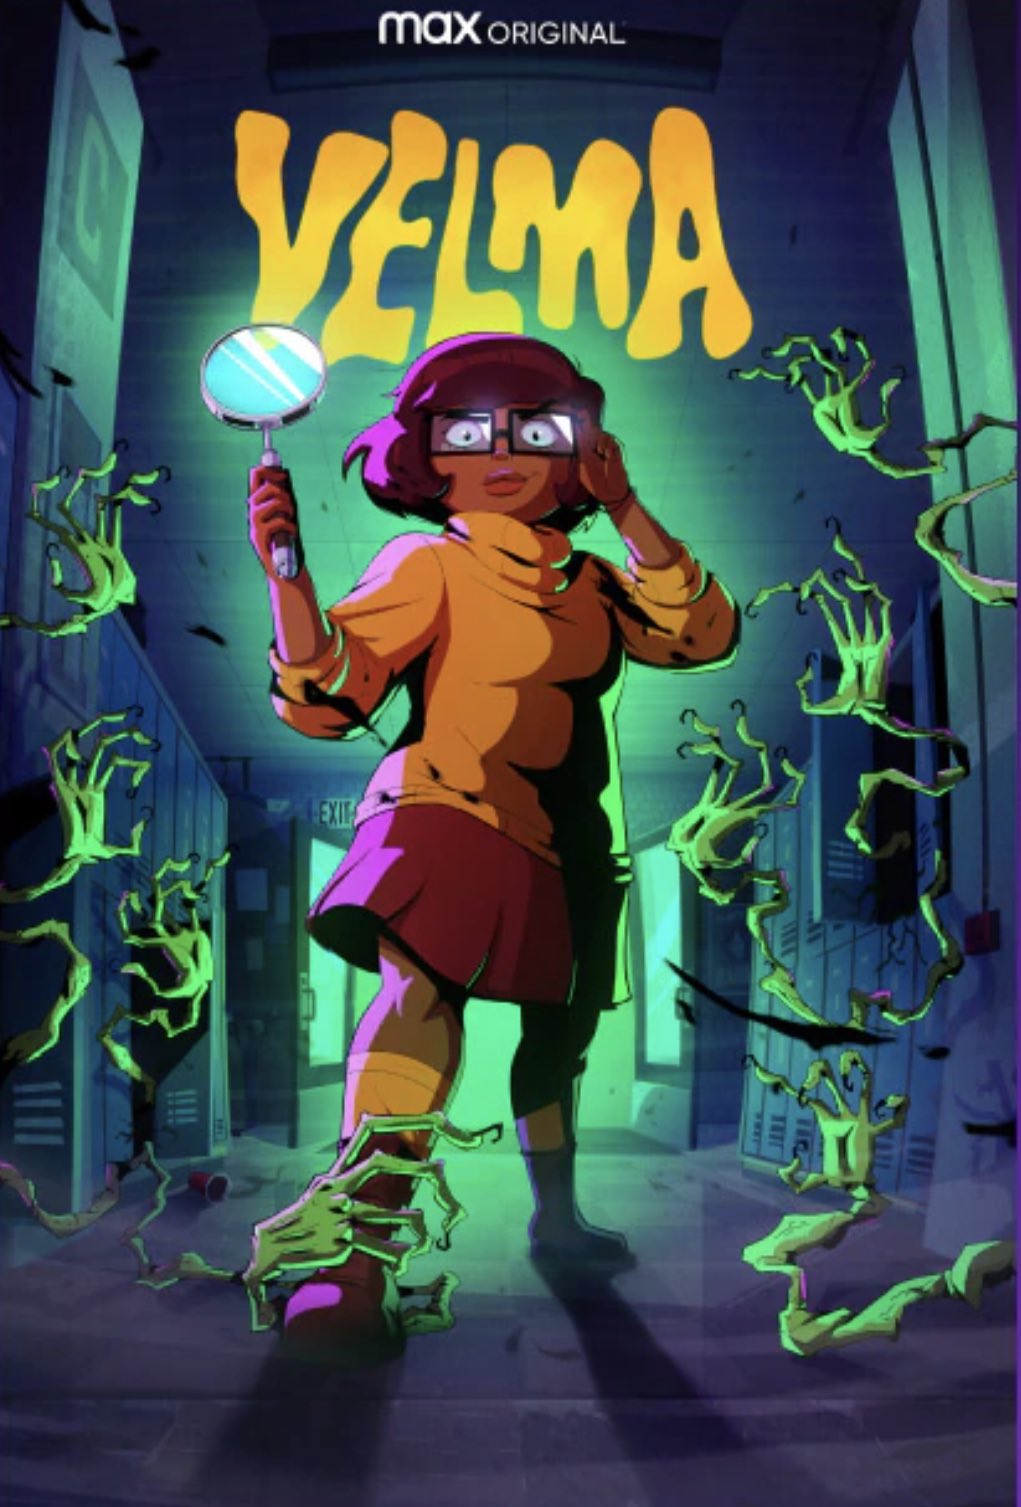 Will Scooby-Doo Appear In HBO Max's Velma?